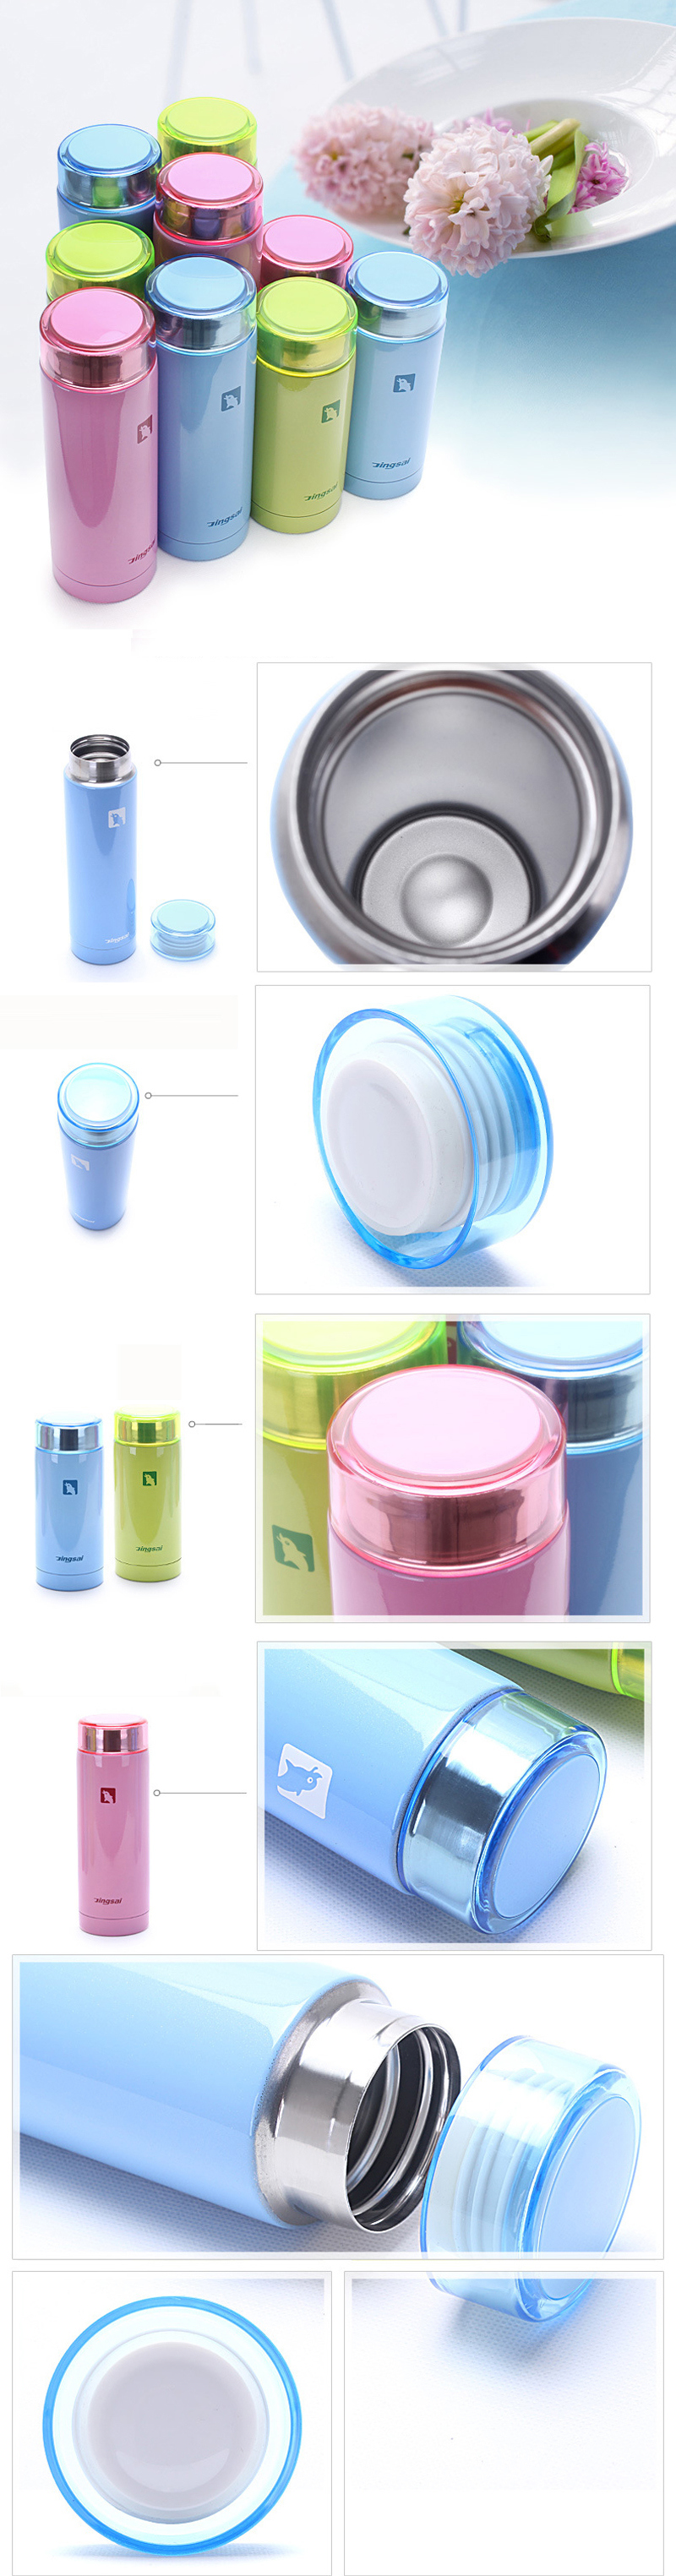 2018 New Design Stainless Steel Vacuum Insulated Thermos Cup Water Bottle 10 Oz